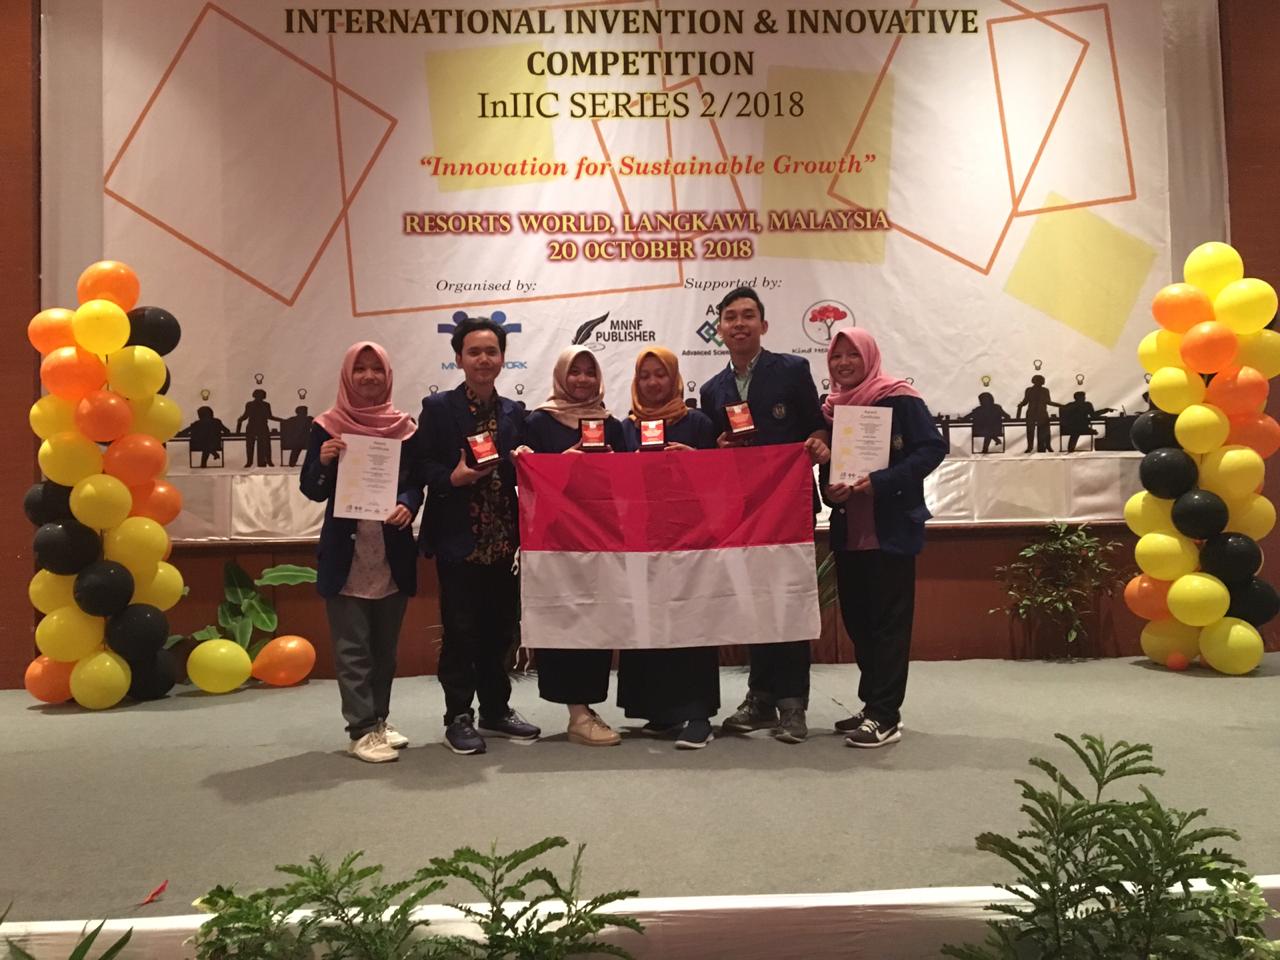 Foto International Invention and Innovative Competition Series 2/2018